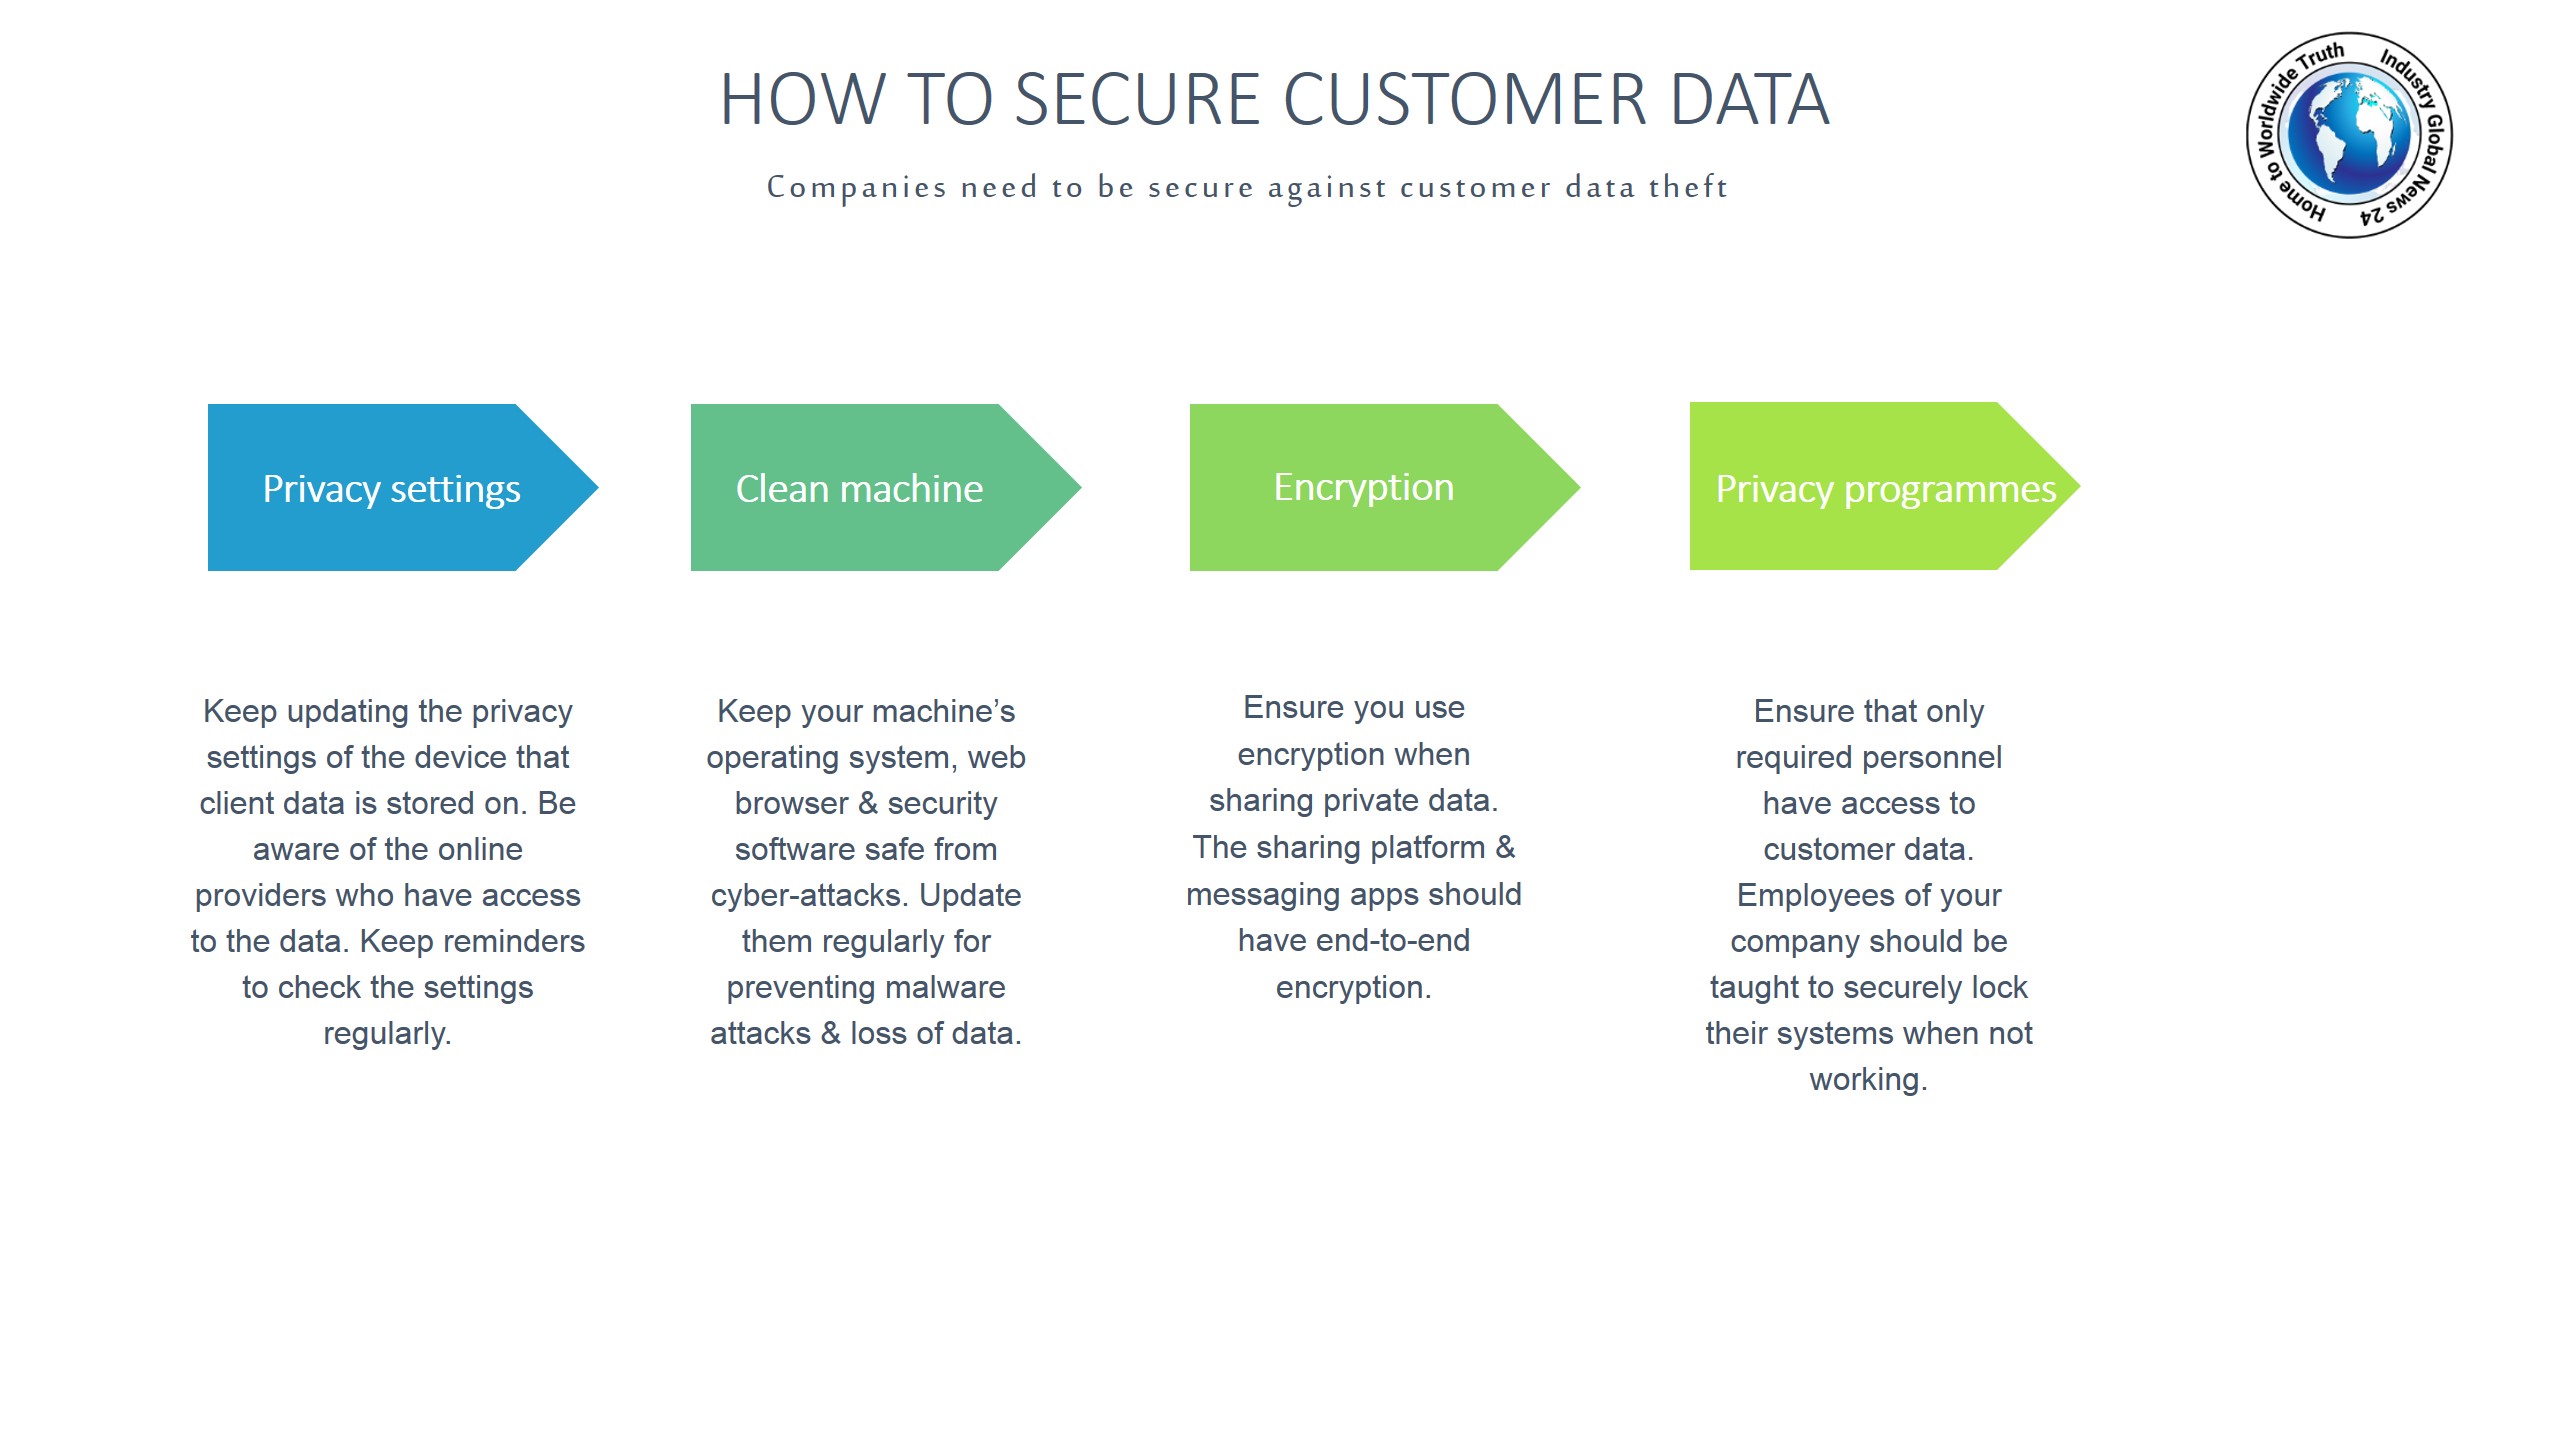 How to secure customer data